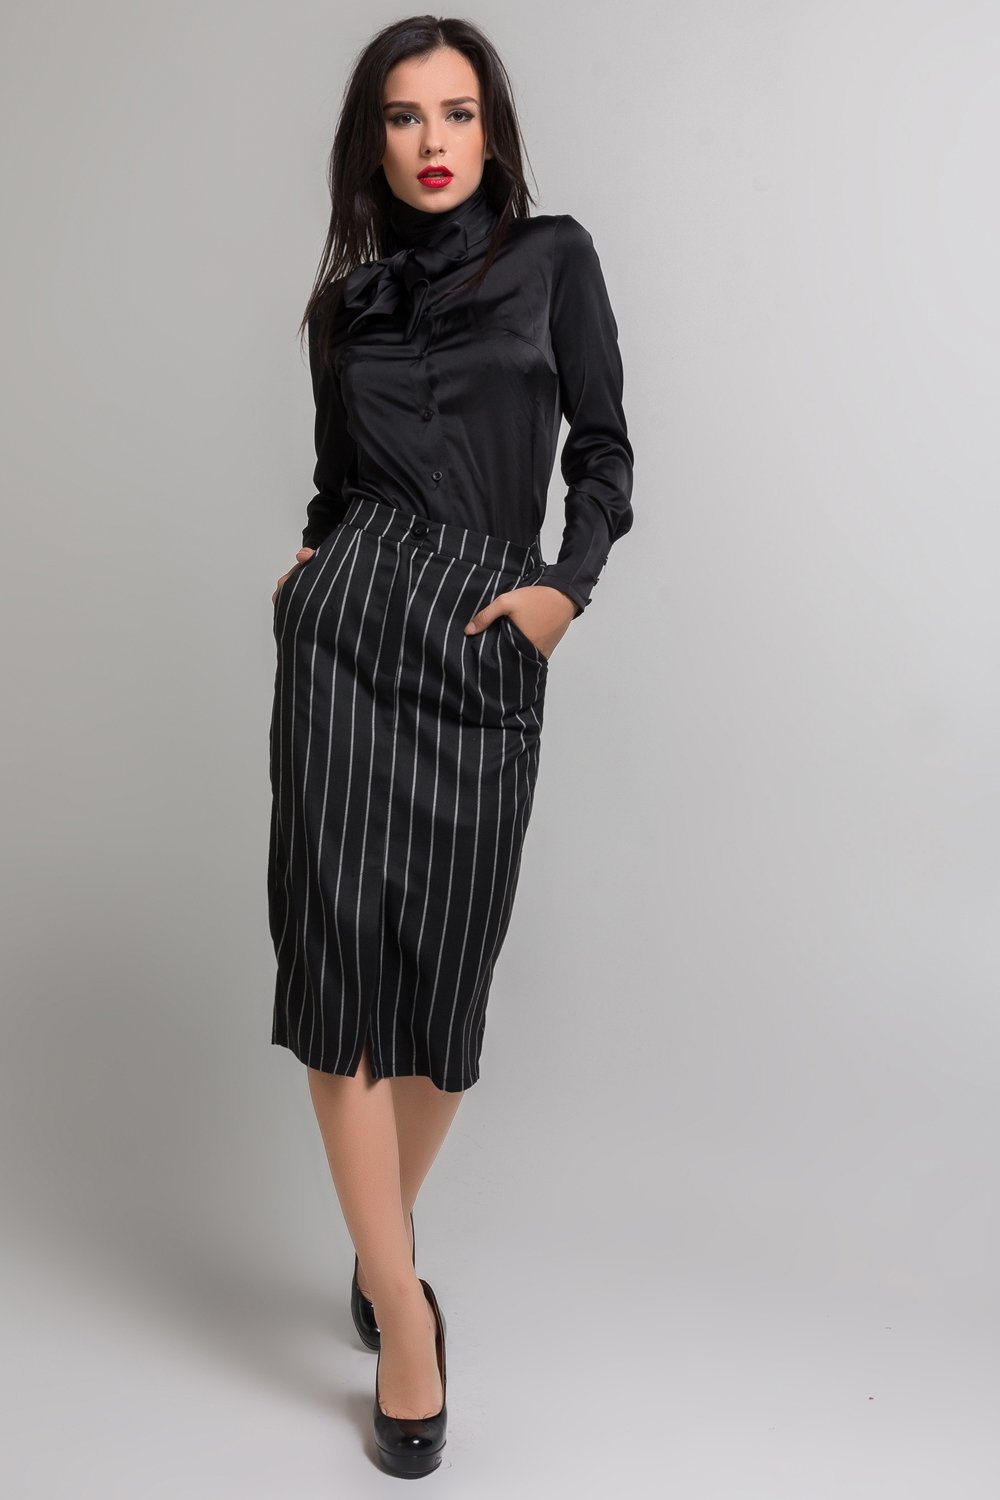 Striped midi skirt with pockets and front cutout.